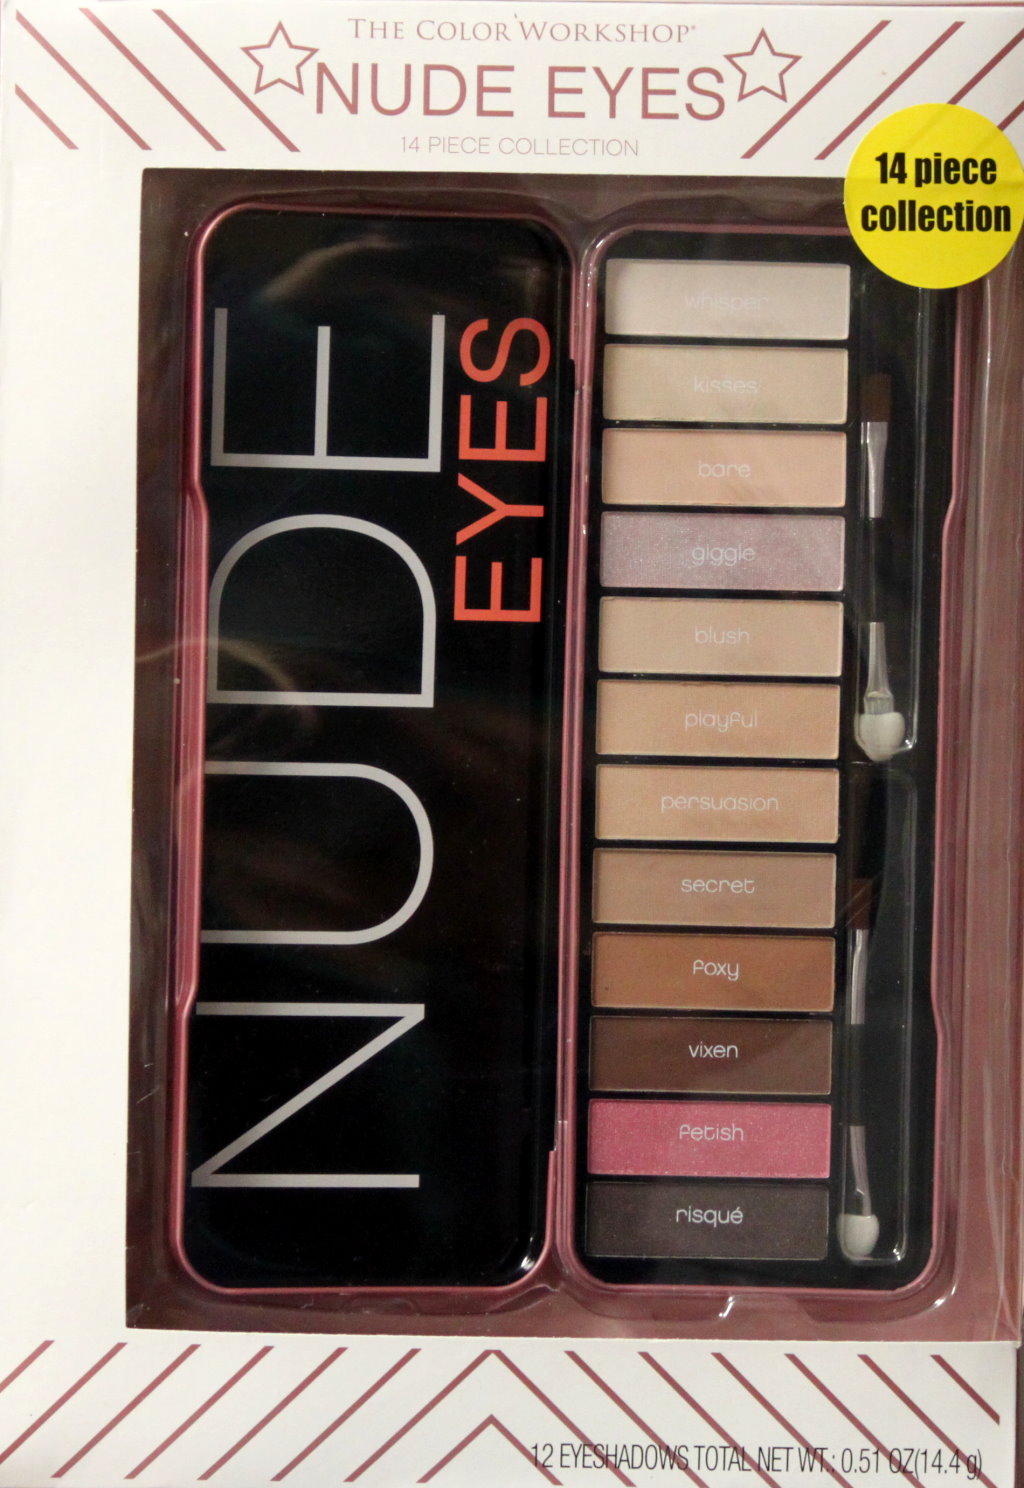 The Color Workshop Nude Eyes 14 Piece Collection Gift Set